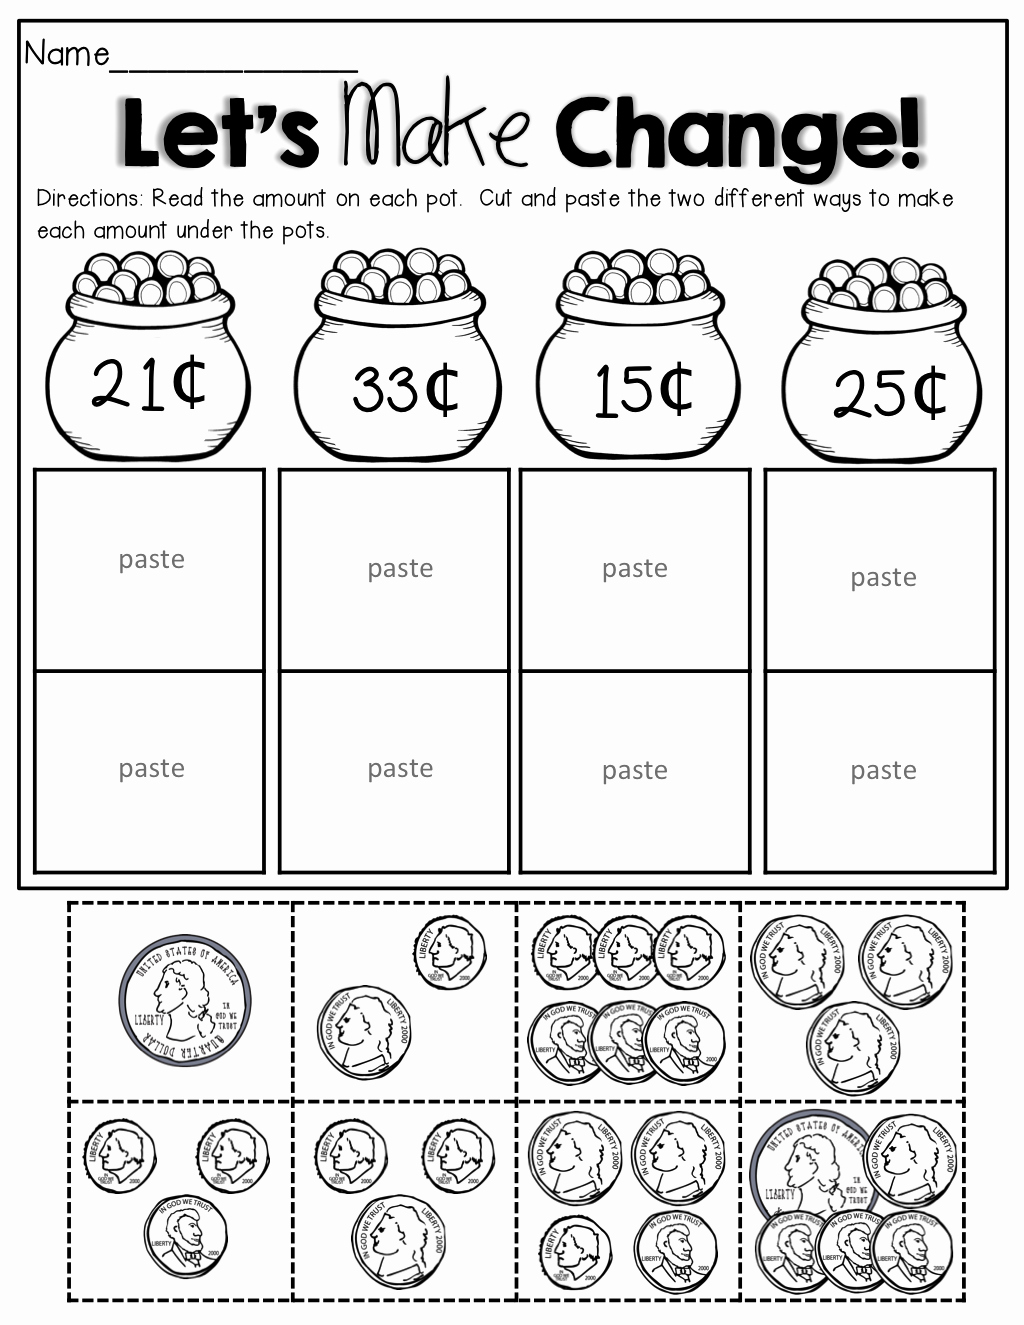 Counting Cut and Paste Worksheets Elegant Pin On 1st Grade Activities